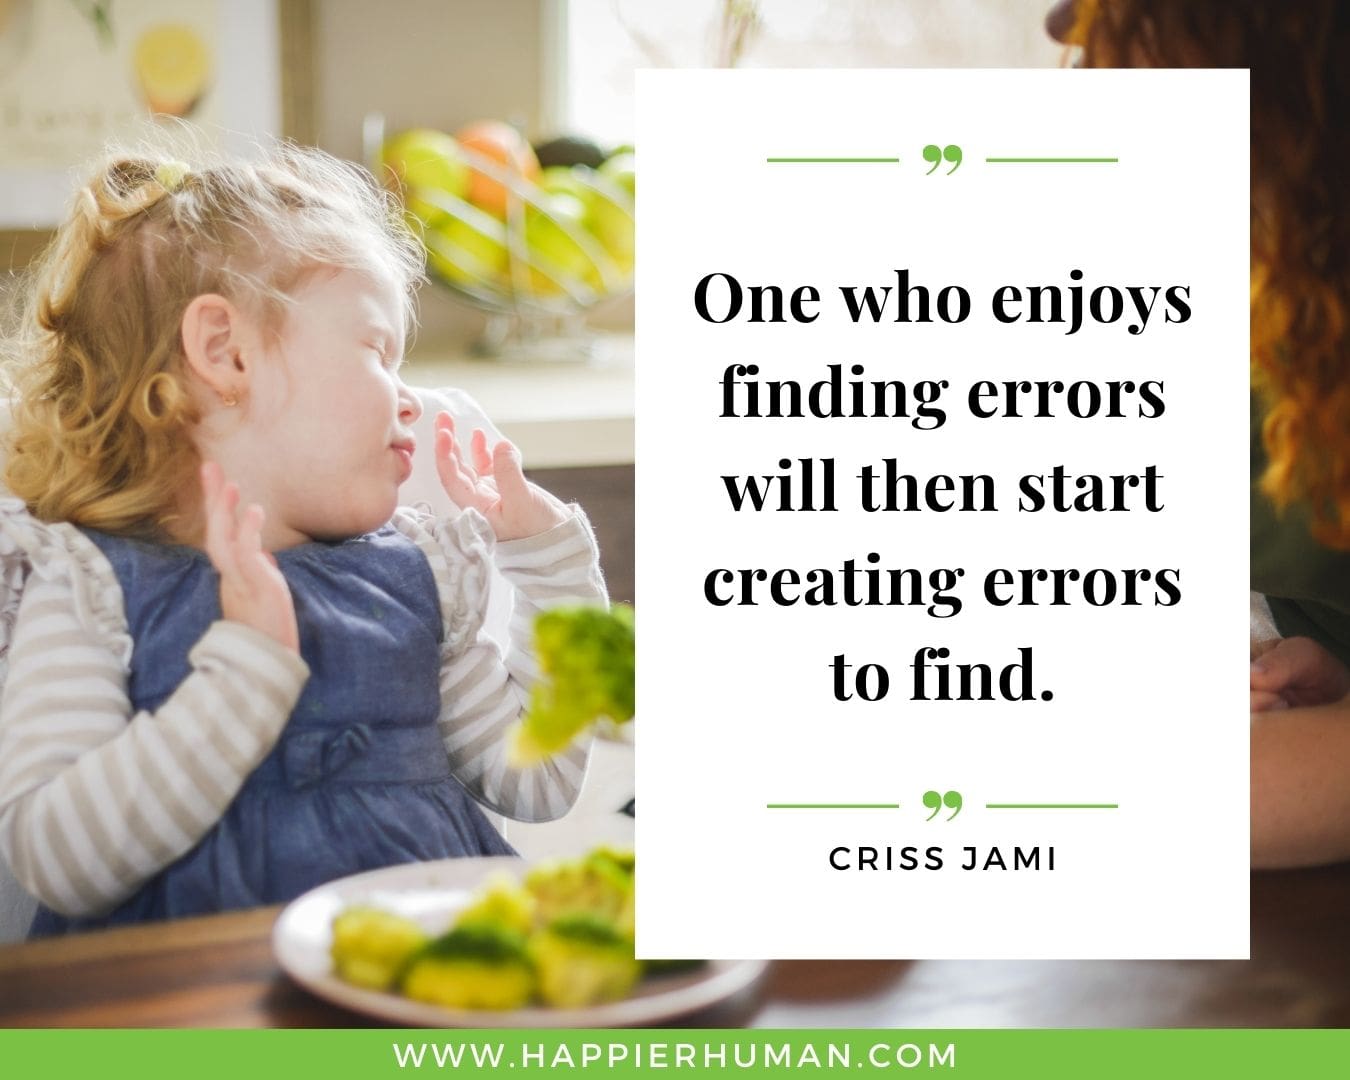 Haters Quotes - “One who enjoys finding errors will then start creating errors to find.“ - Criss Jami